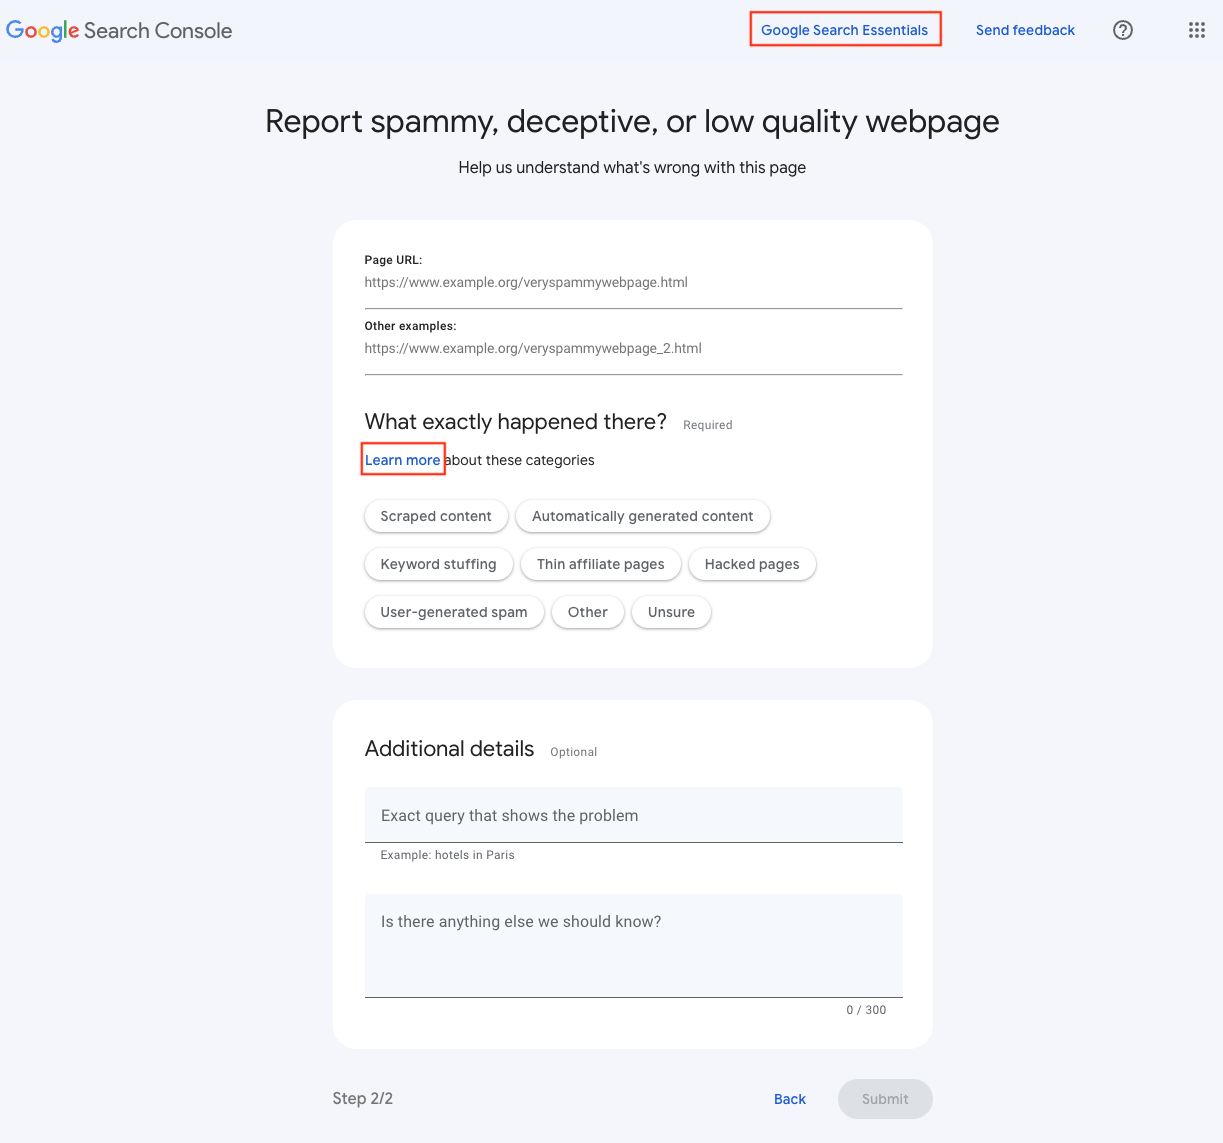 Google Aims To Improve Search Quality With New Feedback Form